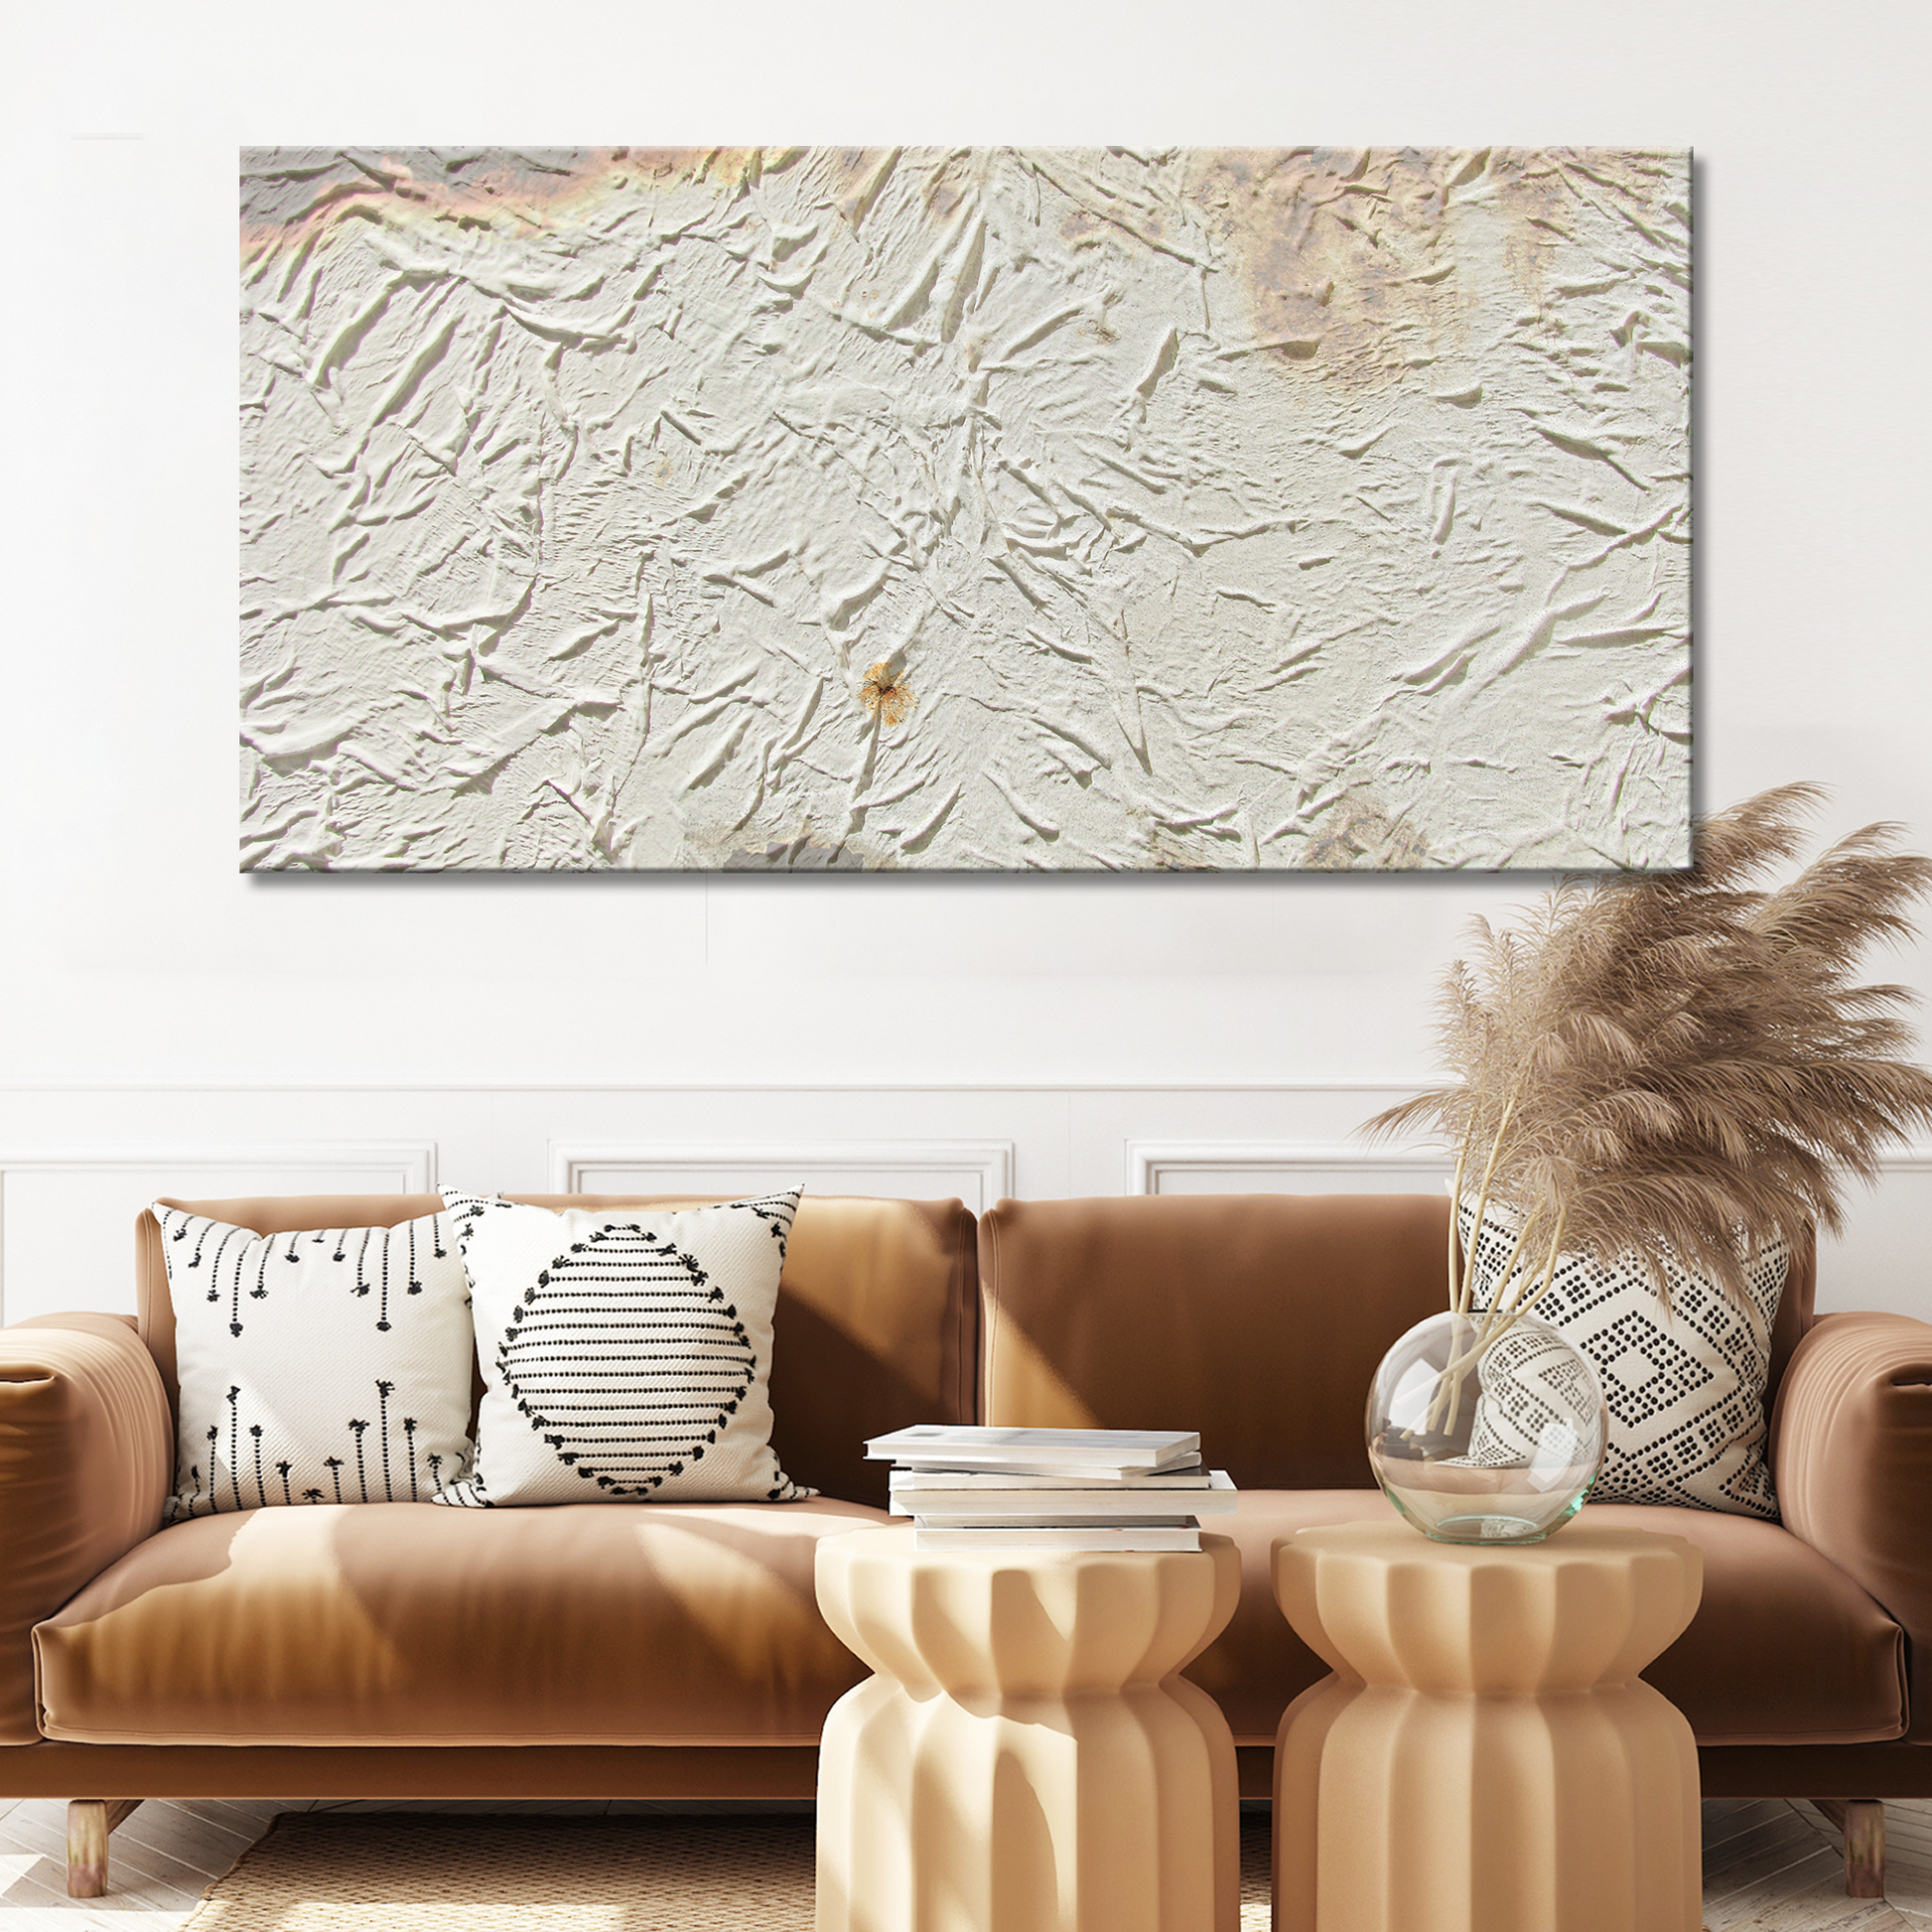 Dirty White Linen Canvas Wall Art - Image by Tailored Canvases